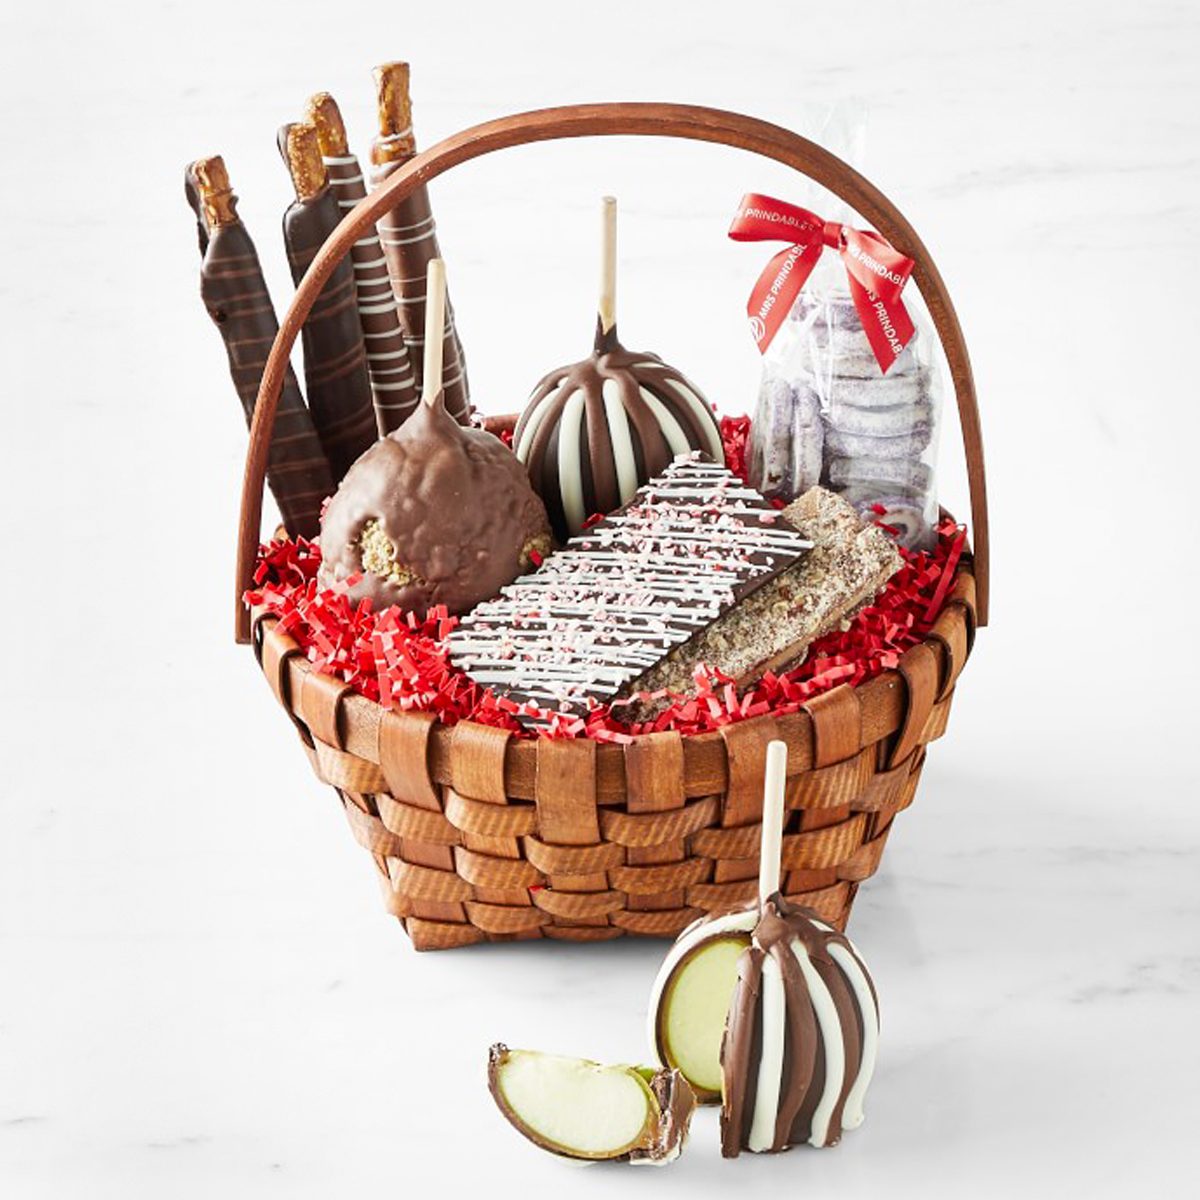 Williams Sonoma 25 Years of Peppermint Bark Gift Crate